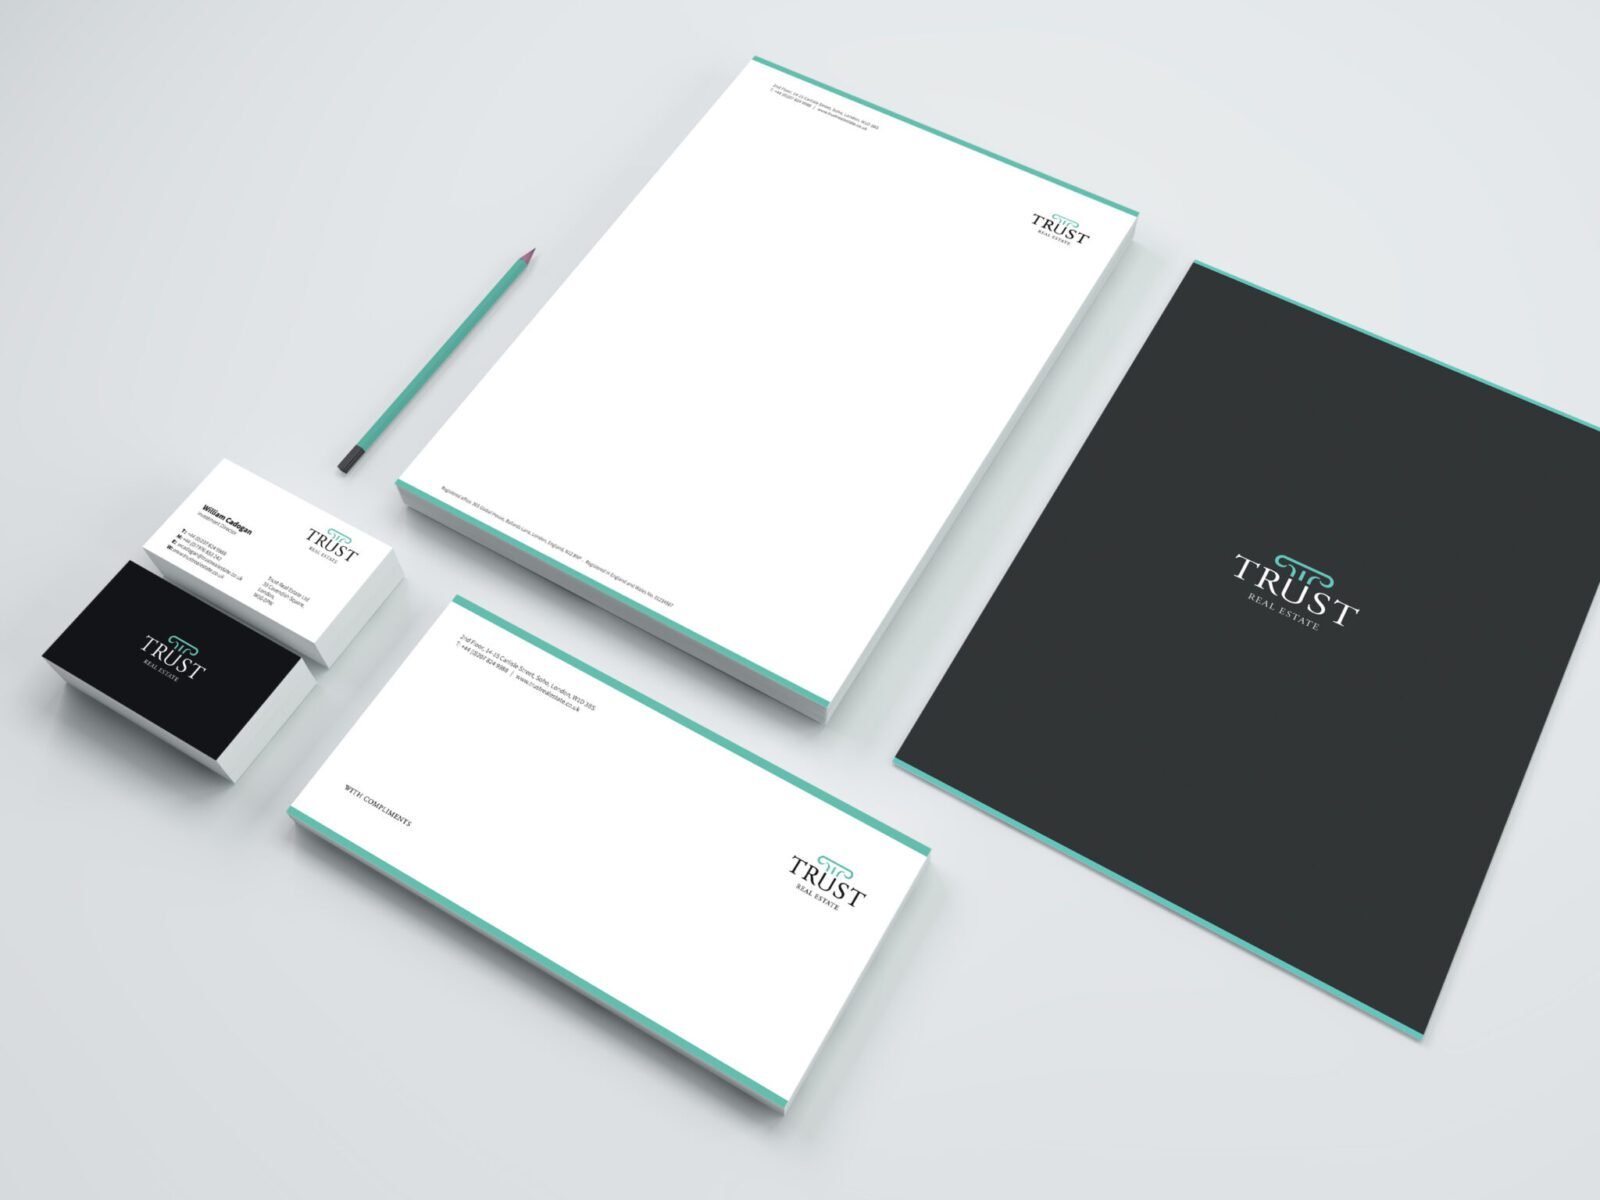 Mock-up of Trust Real Estate's property brand and stationery design.